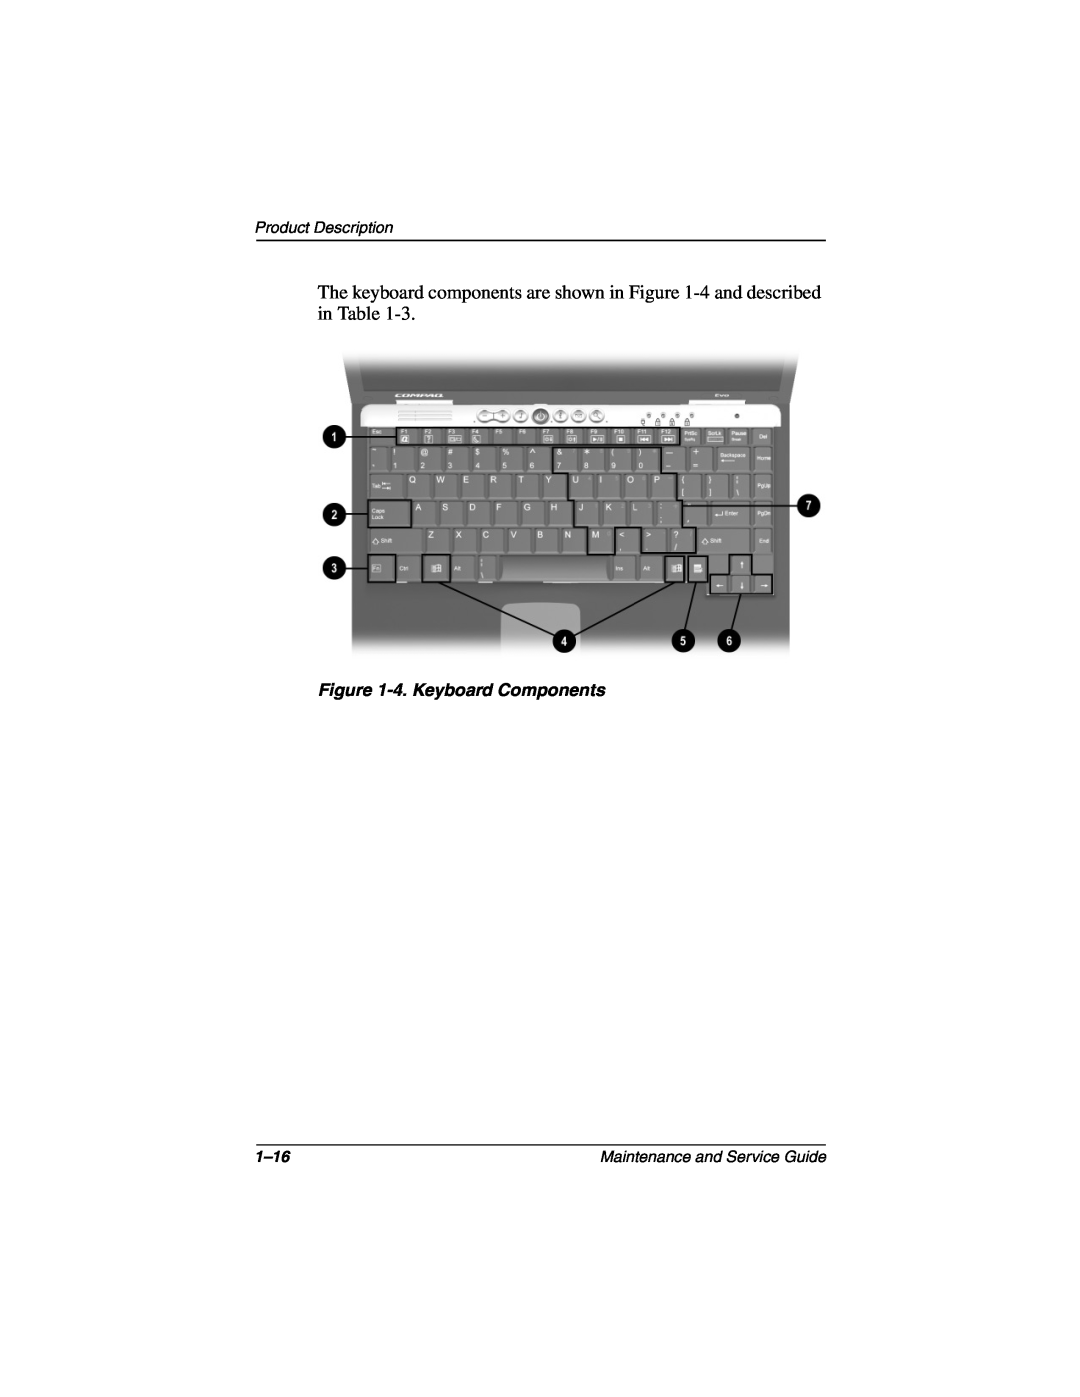 Compaq N160 manual 4. Keyboard Components, Product Description, 1-16, Maintenance and Service Guide 